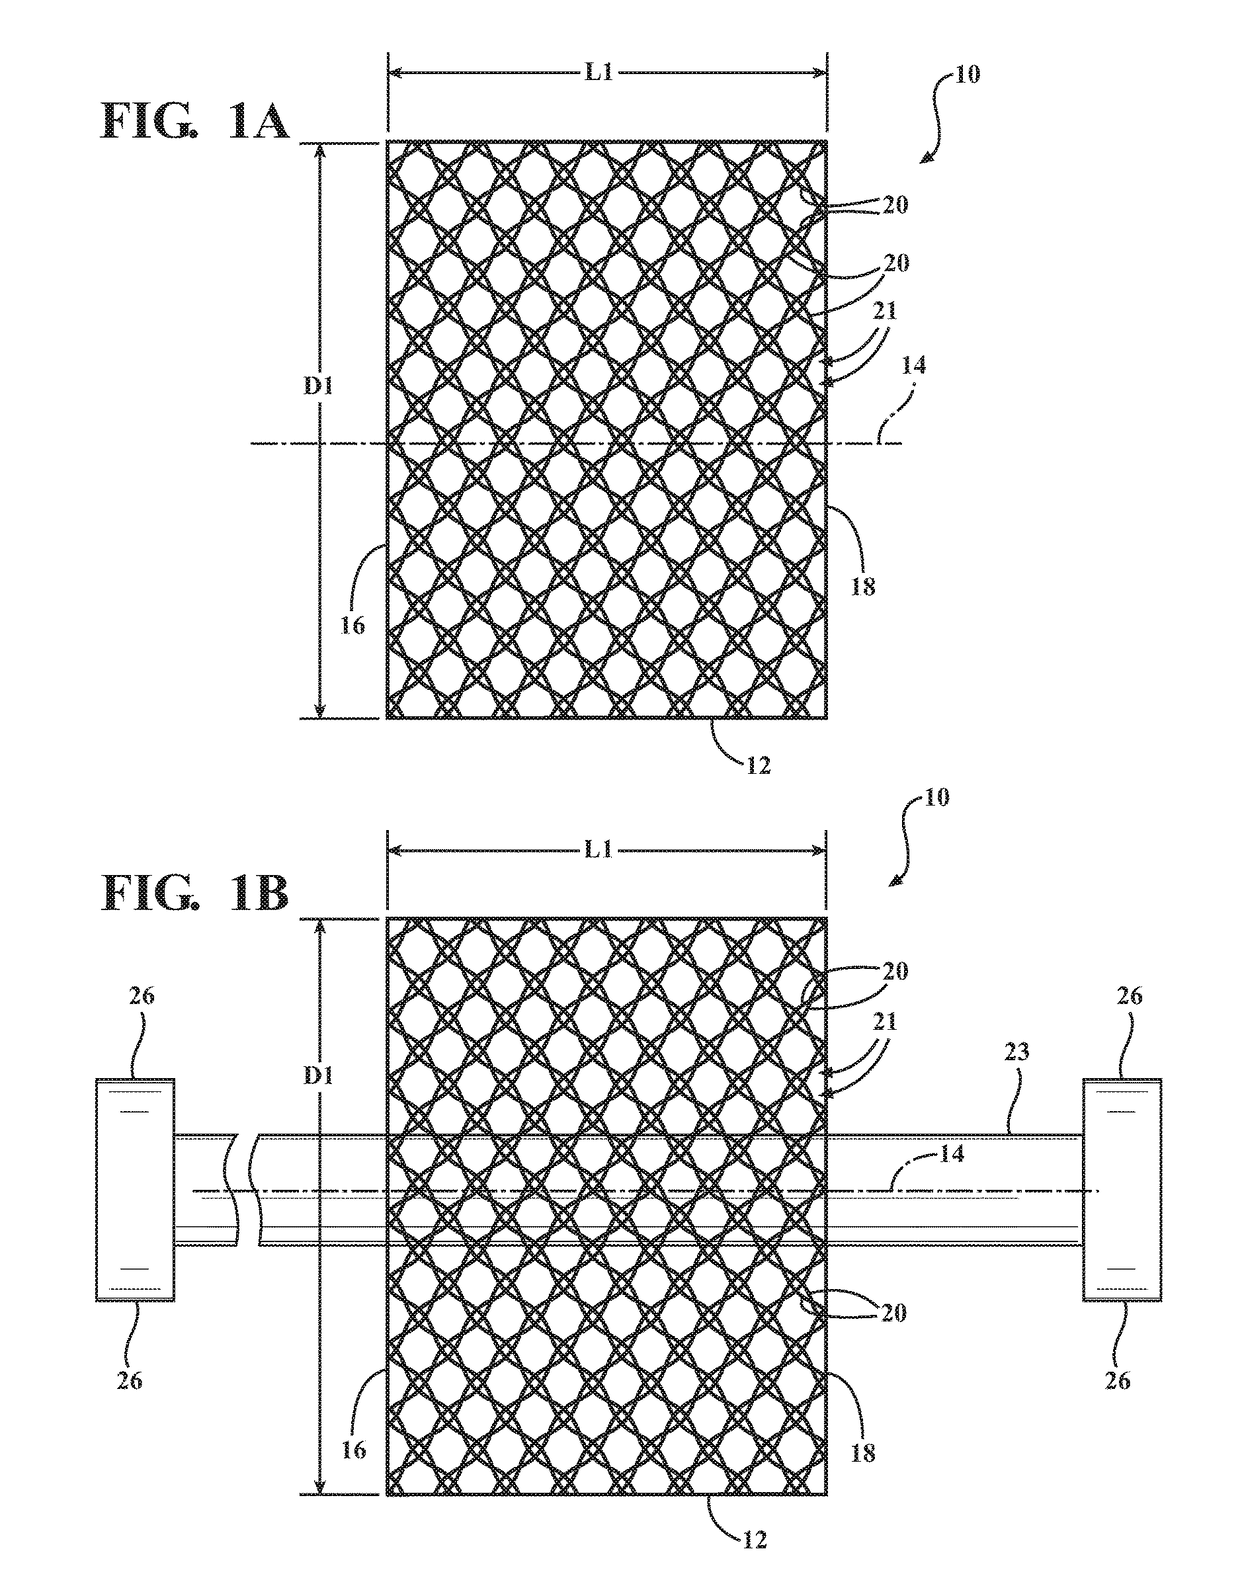 Braided textile sleeve with self-sustaining expanded and contracted states and enhanced "as supplied" bulk configuration and methods of construction and supplying bulk lengths thereof